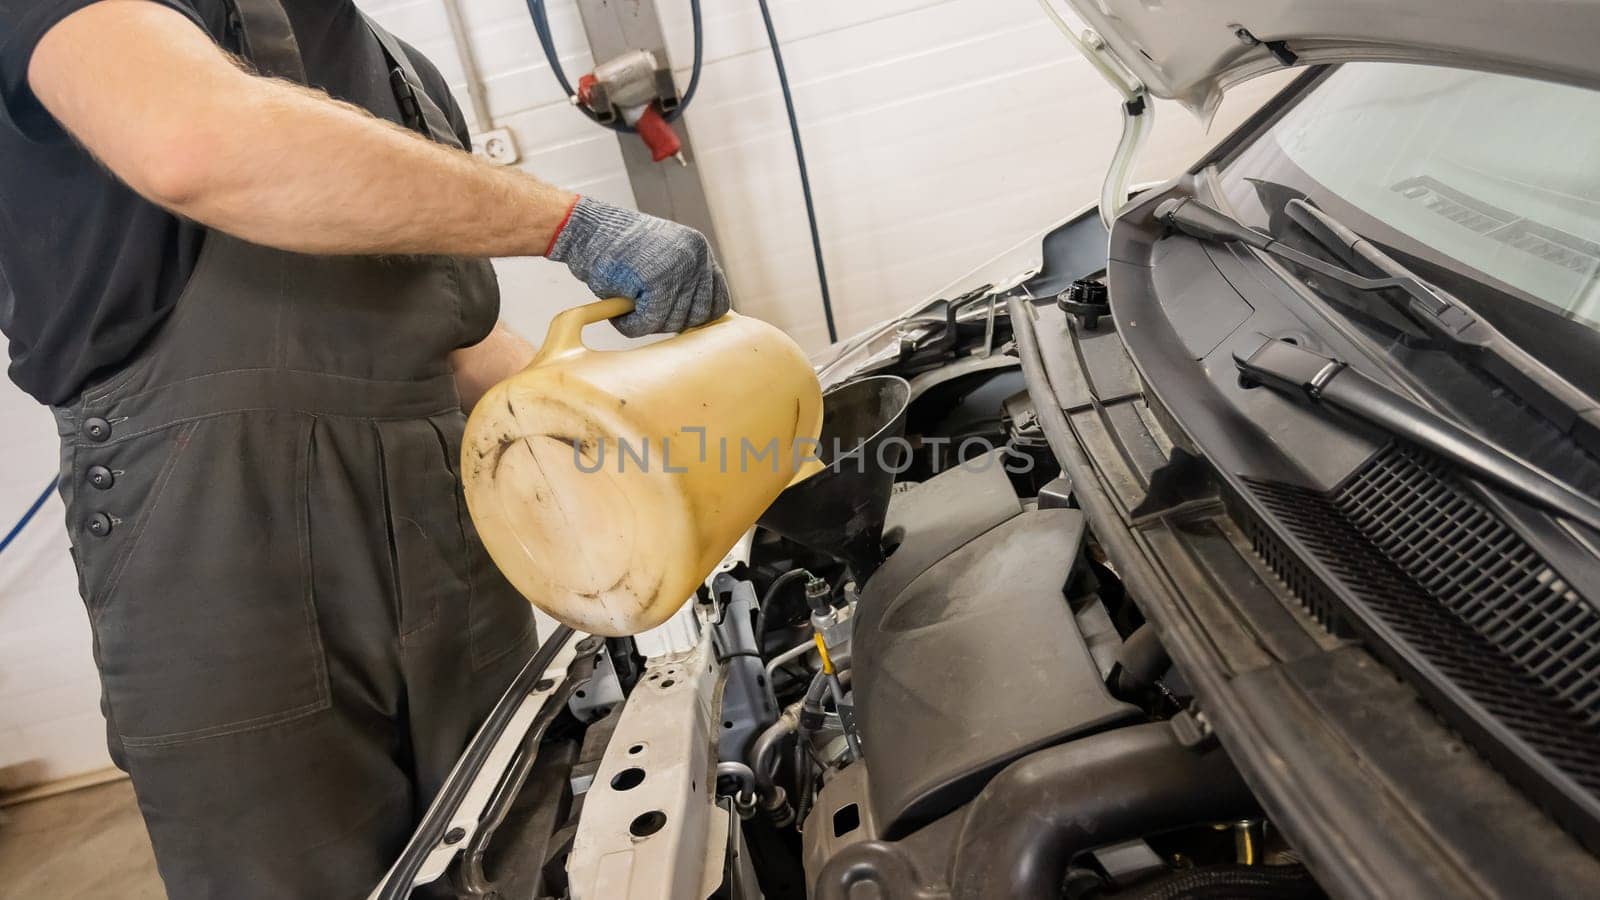 A mechanic fills a car engine with oil. Close-up of a man's hands